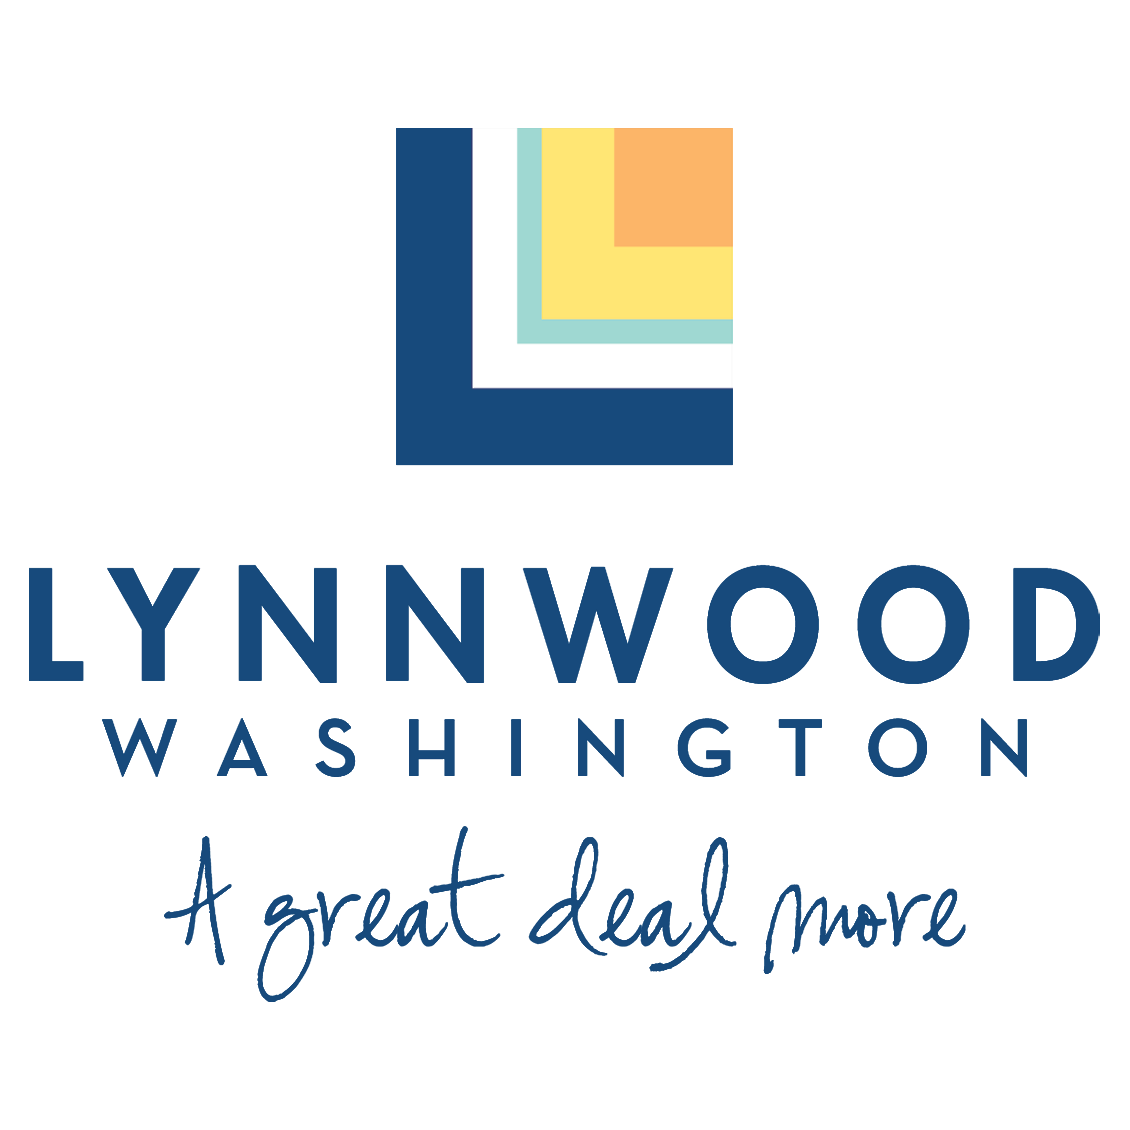 Picture that has the Lynnwood logo and says 